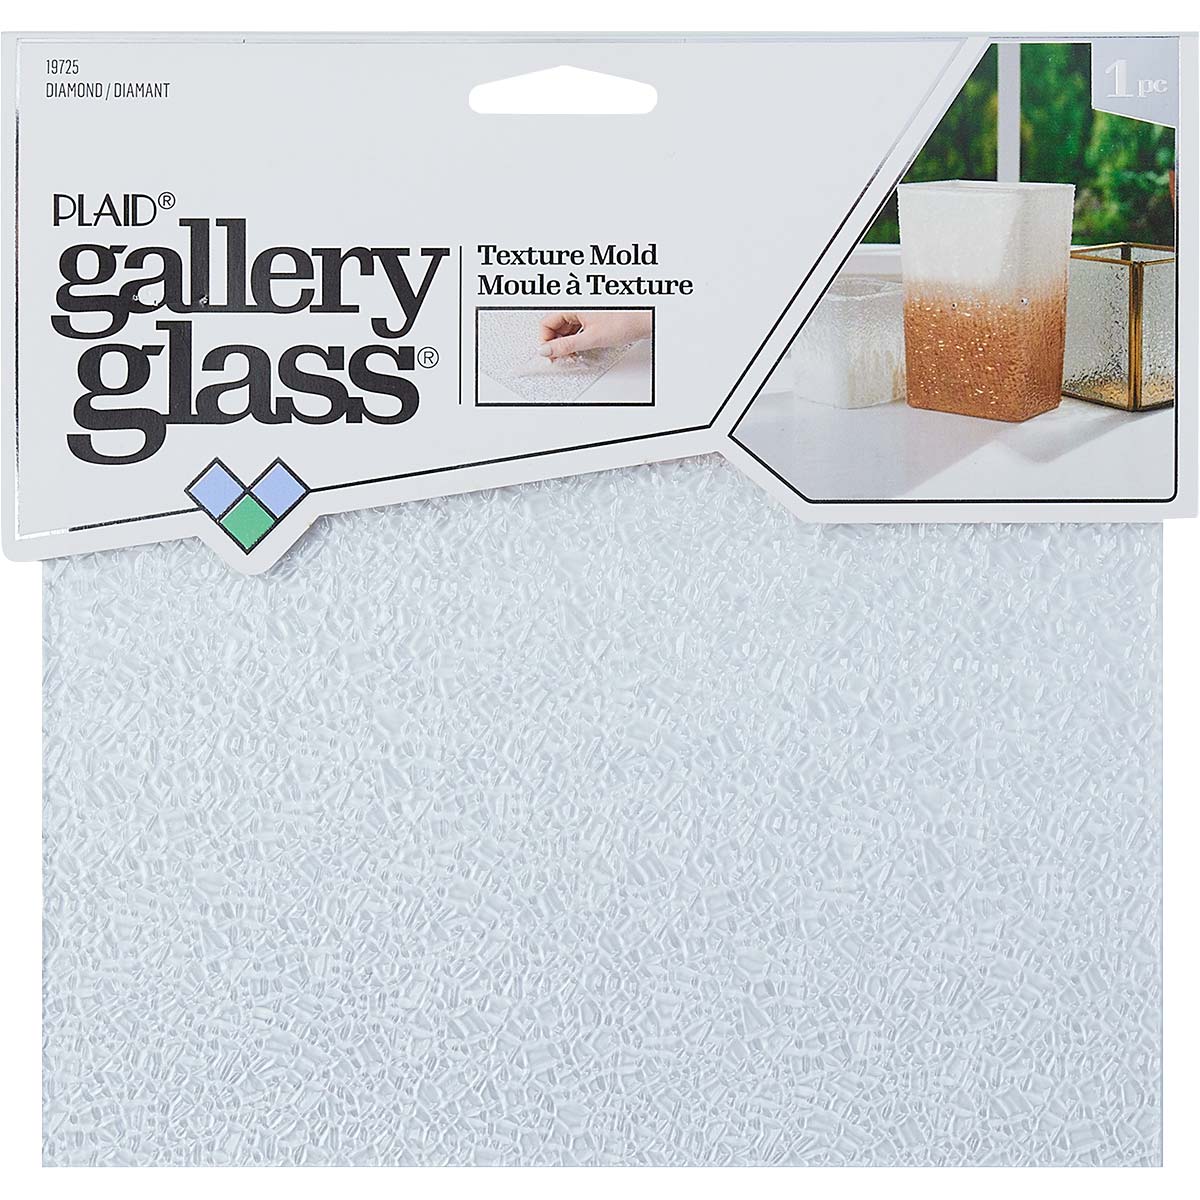 Shop Plaid Gallery Glass ® Pattern Packs - Floral - 19736 - 19736